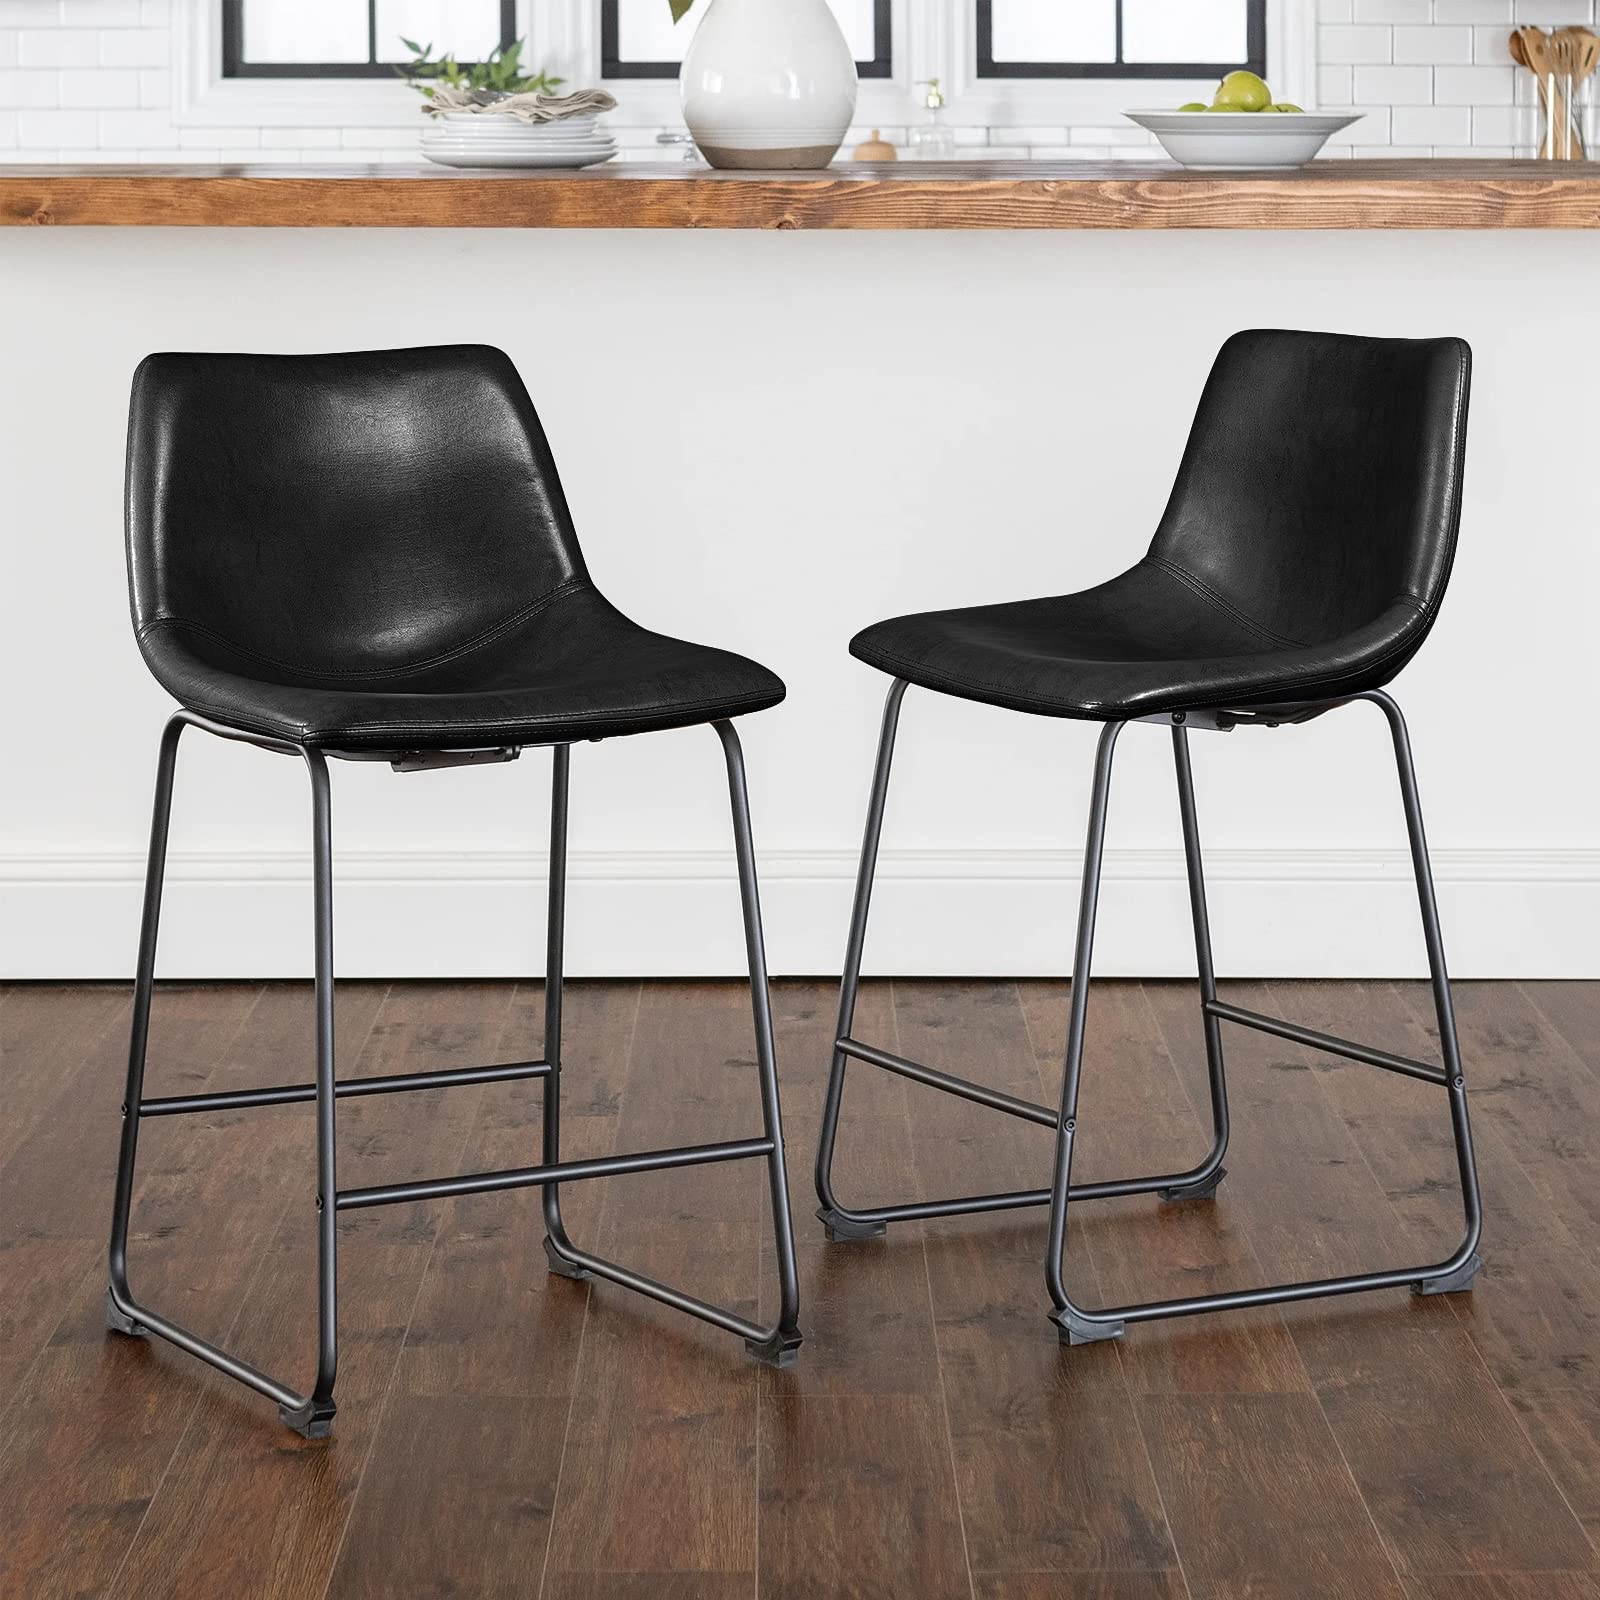 LEMBERI 26 inch Bar Stools PU Leather Counter Height Stools, Modern Style Upholstery with Metal Leg and Backrest Armless Bar Chairs, Dining Chairs ...